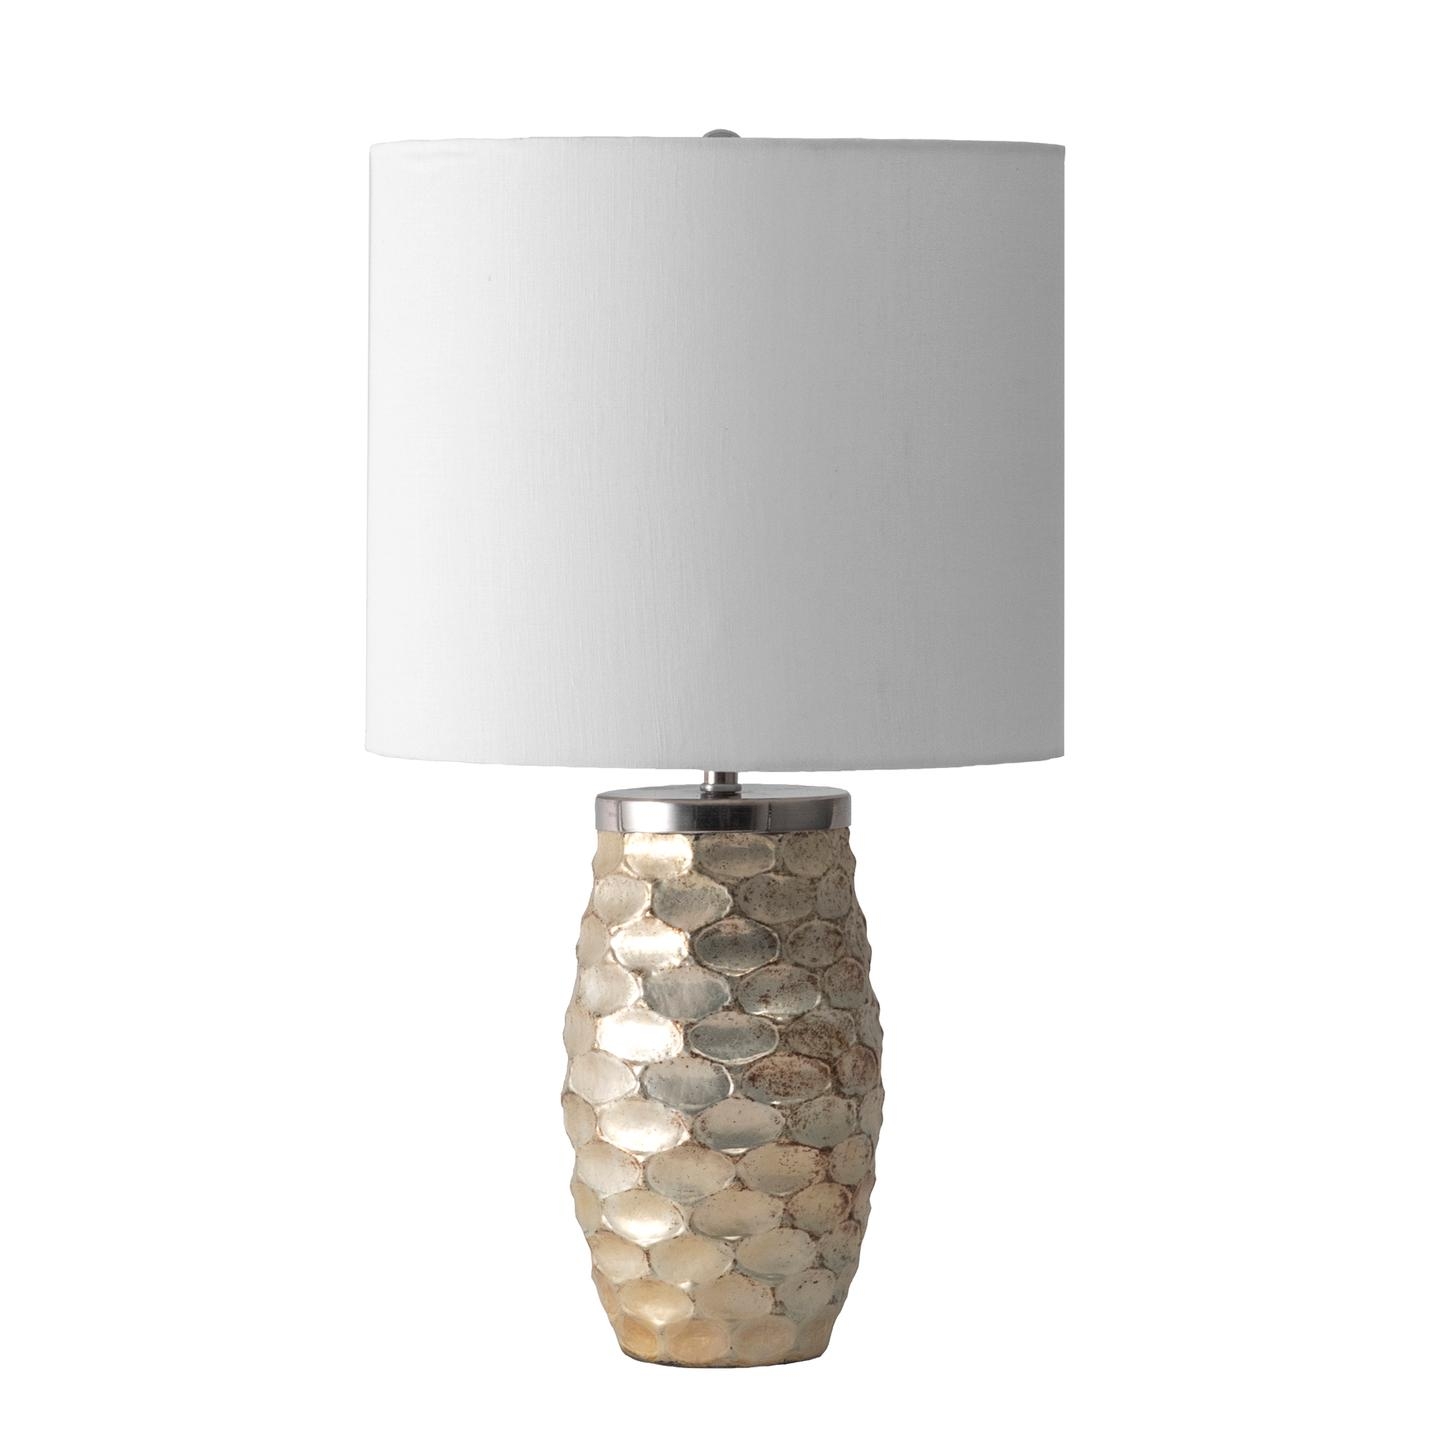 Barstow 19" Glass Table Lamp - Image 2